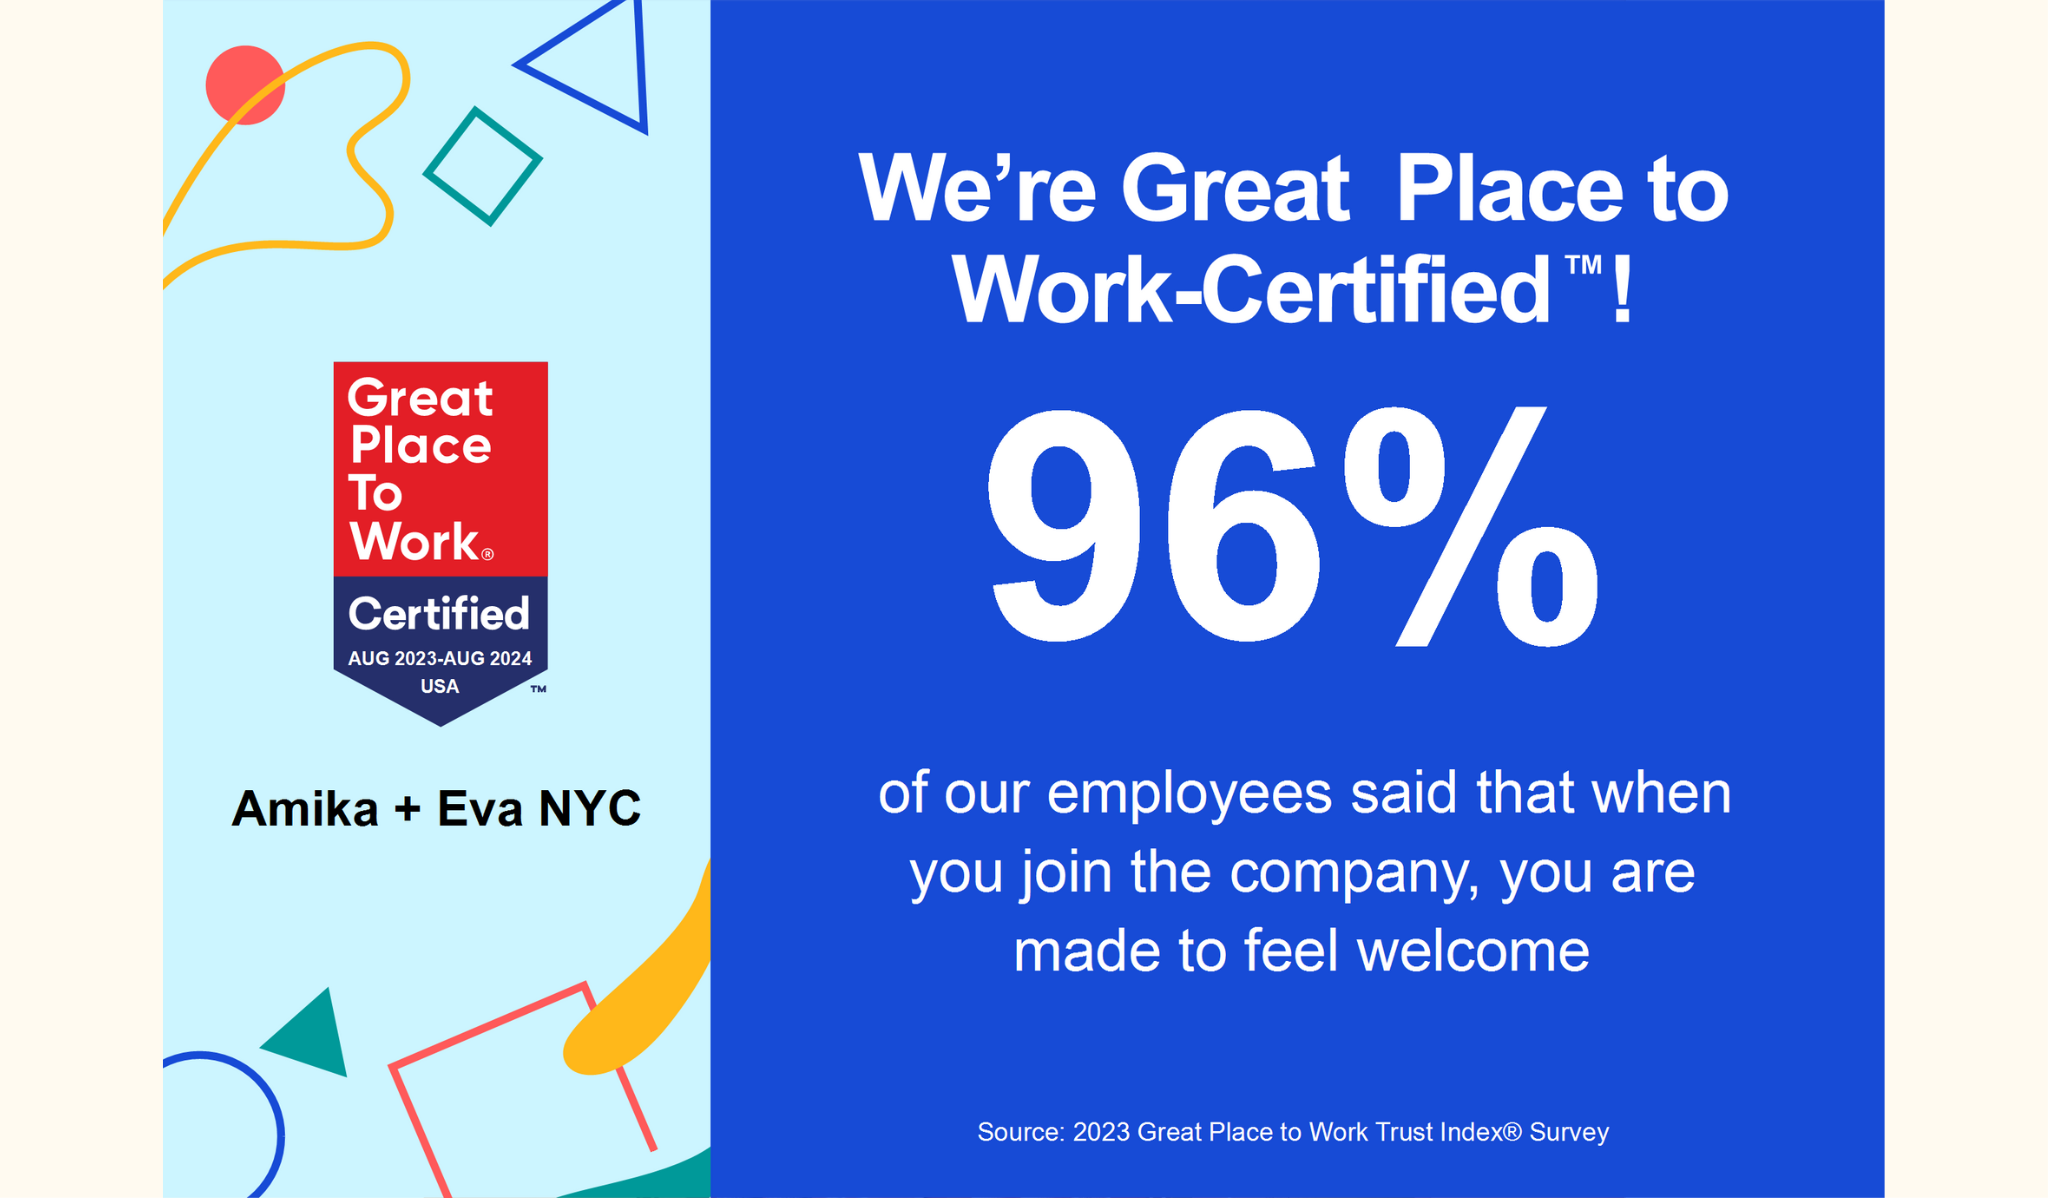 96% of our employees said that when you join the company, you are made to feel welcome